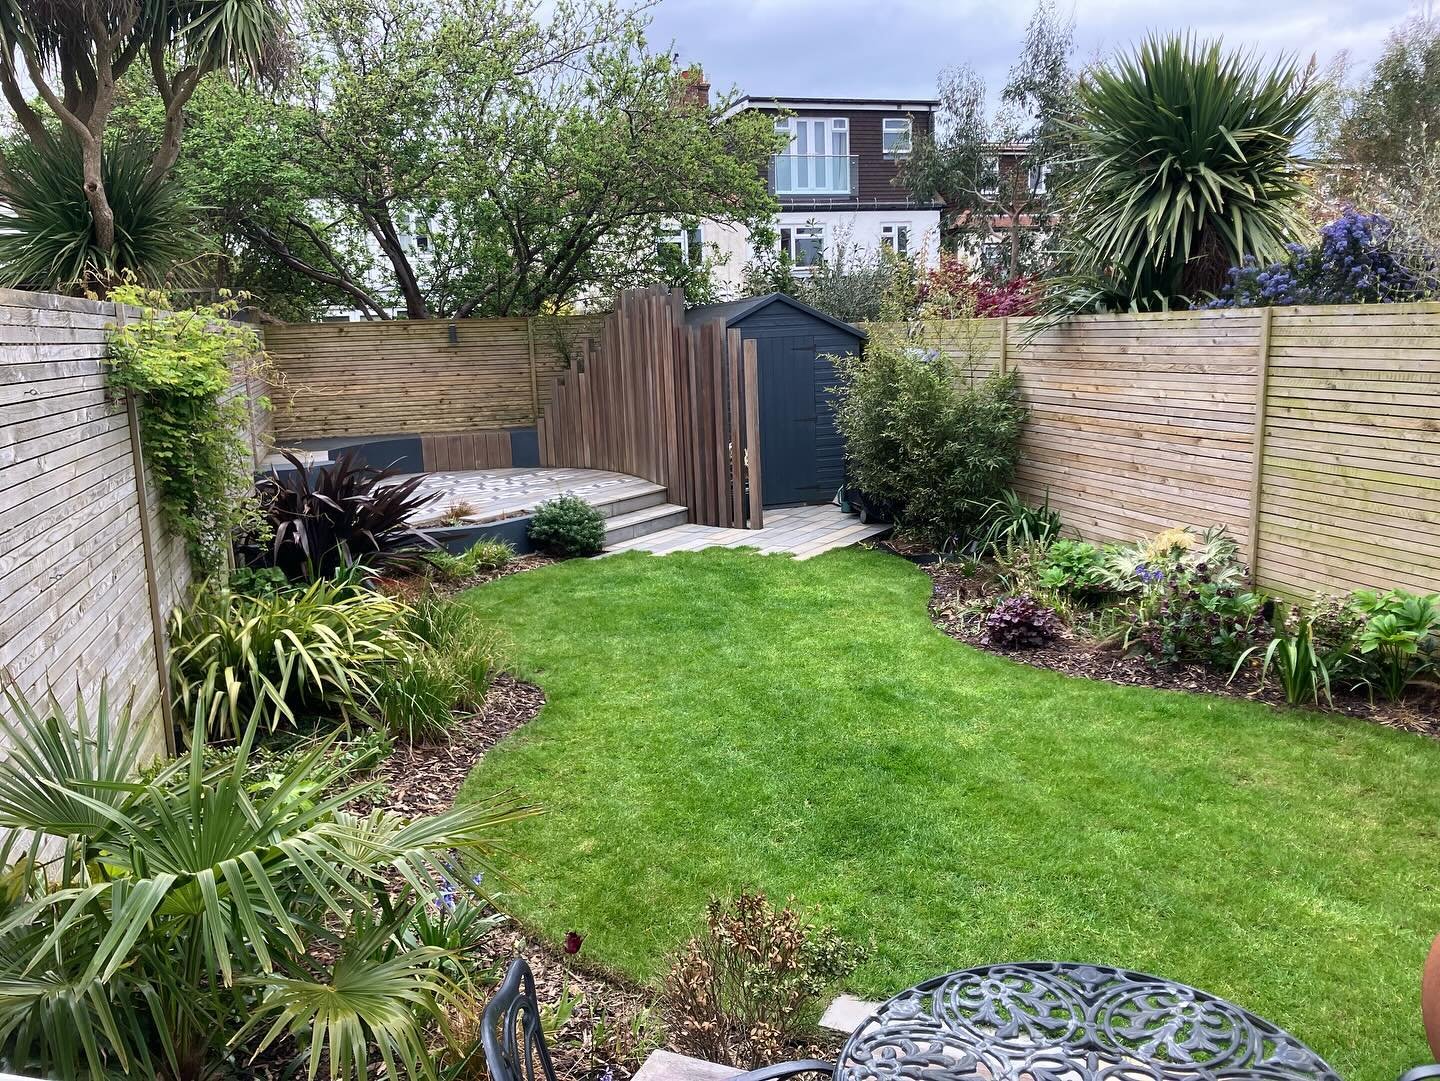 Just revisited this garden , it&rsquo;s been over a year since we did it and the clients have done an amazing job at keeping it looking pristine. It is always so good to go back and see how our gardens are doing as they mature. I loved the hardwood p